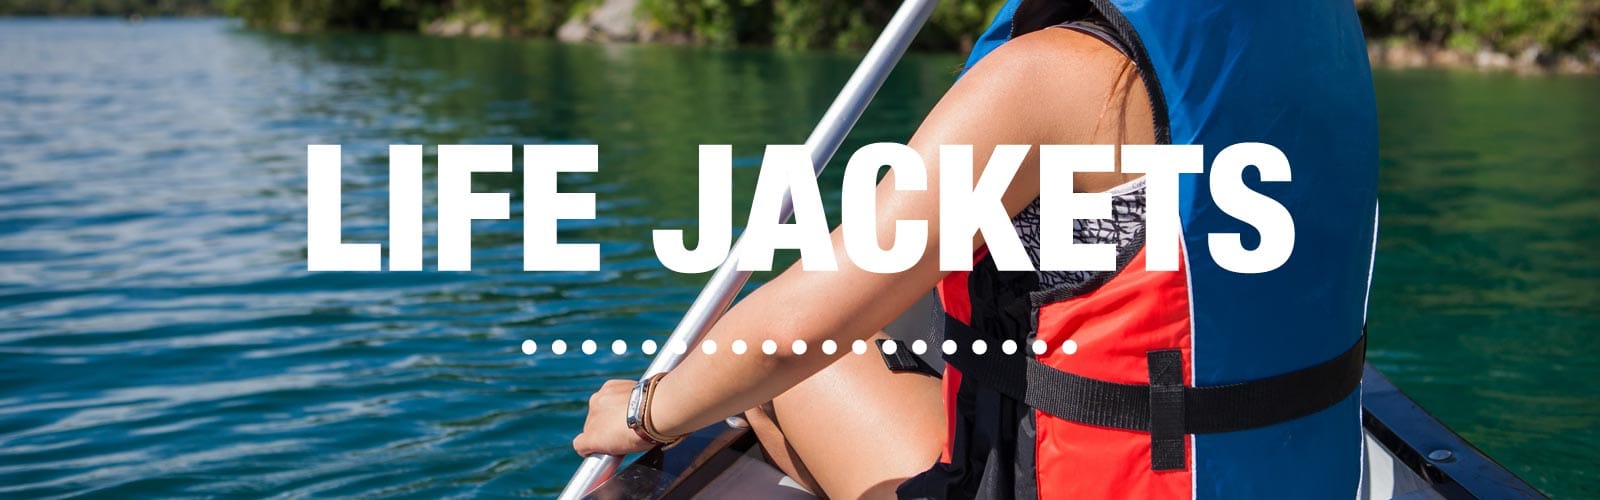 Life Jacket Guide